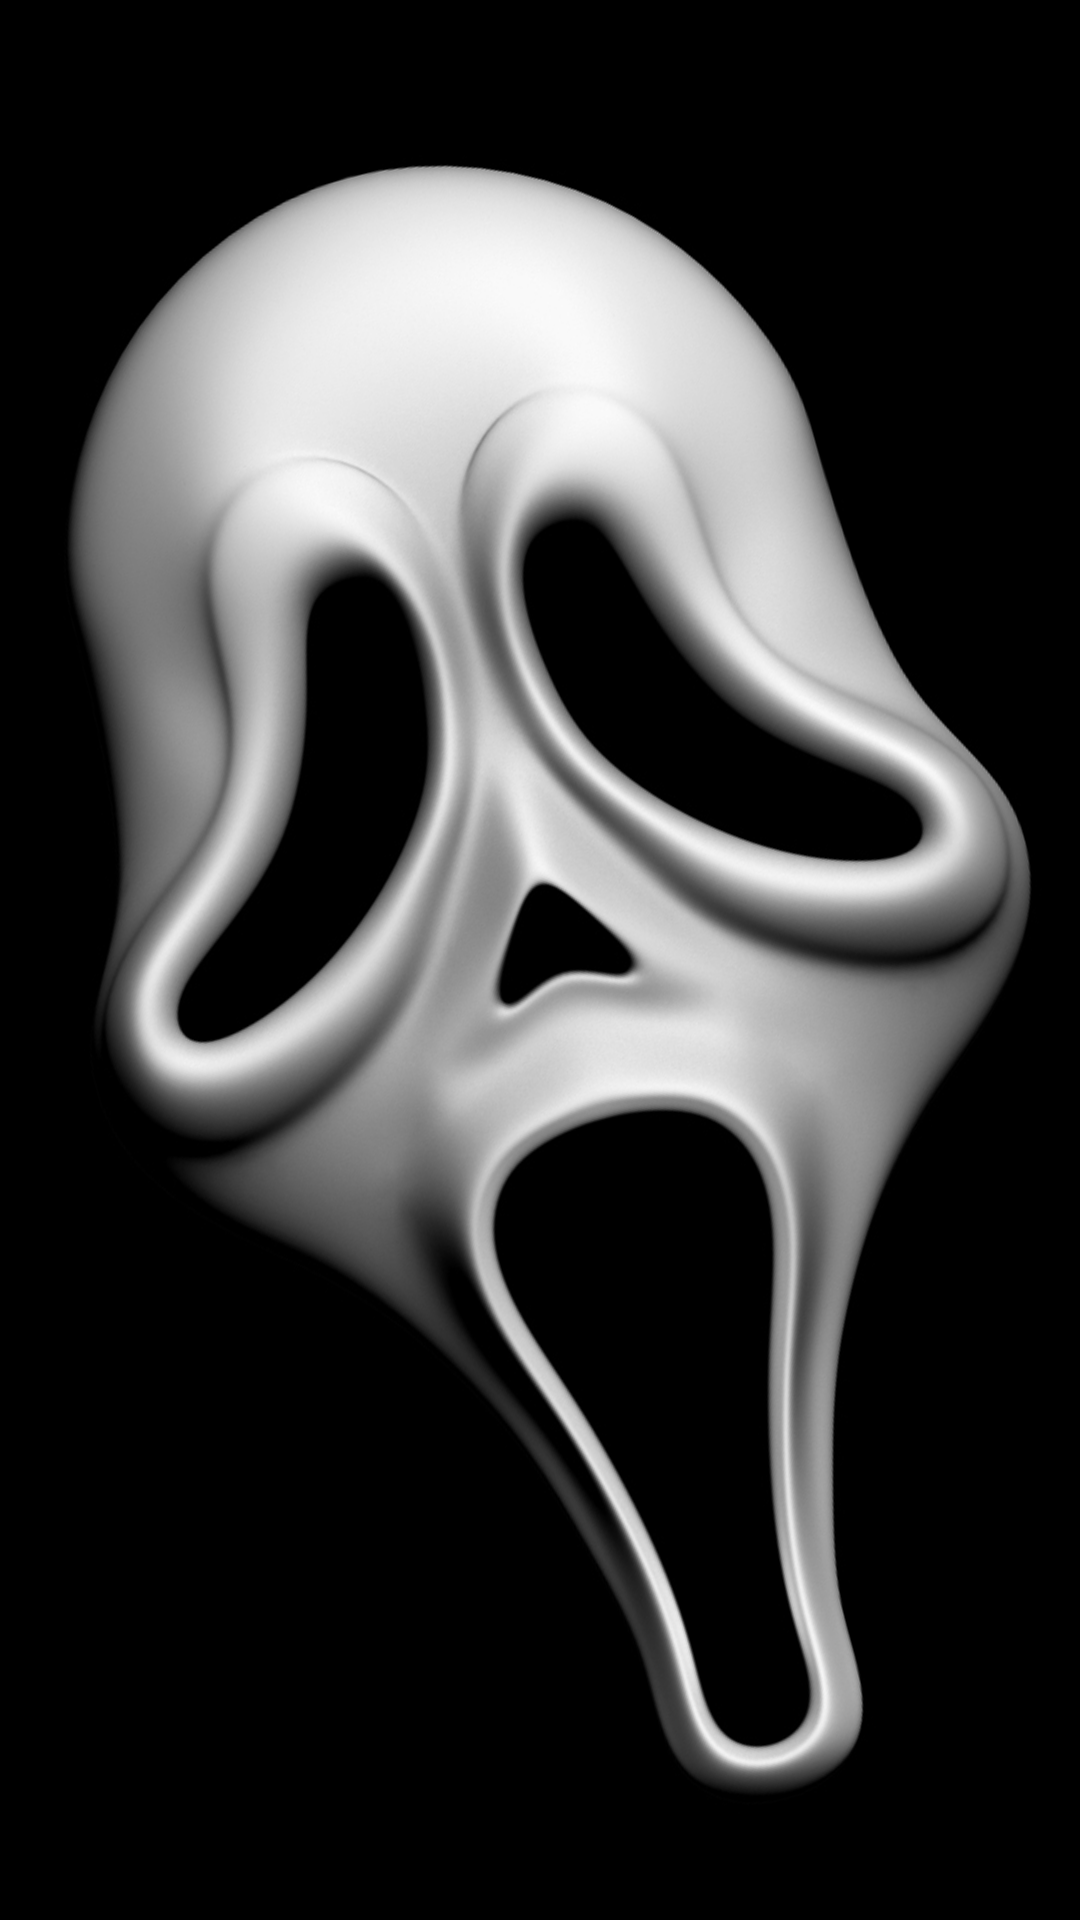 1080x1920 Ghostface Wallpapers for IPhone 6S 7 8 Retina HD